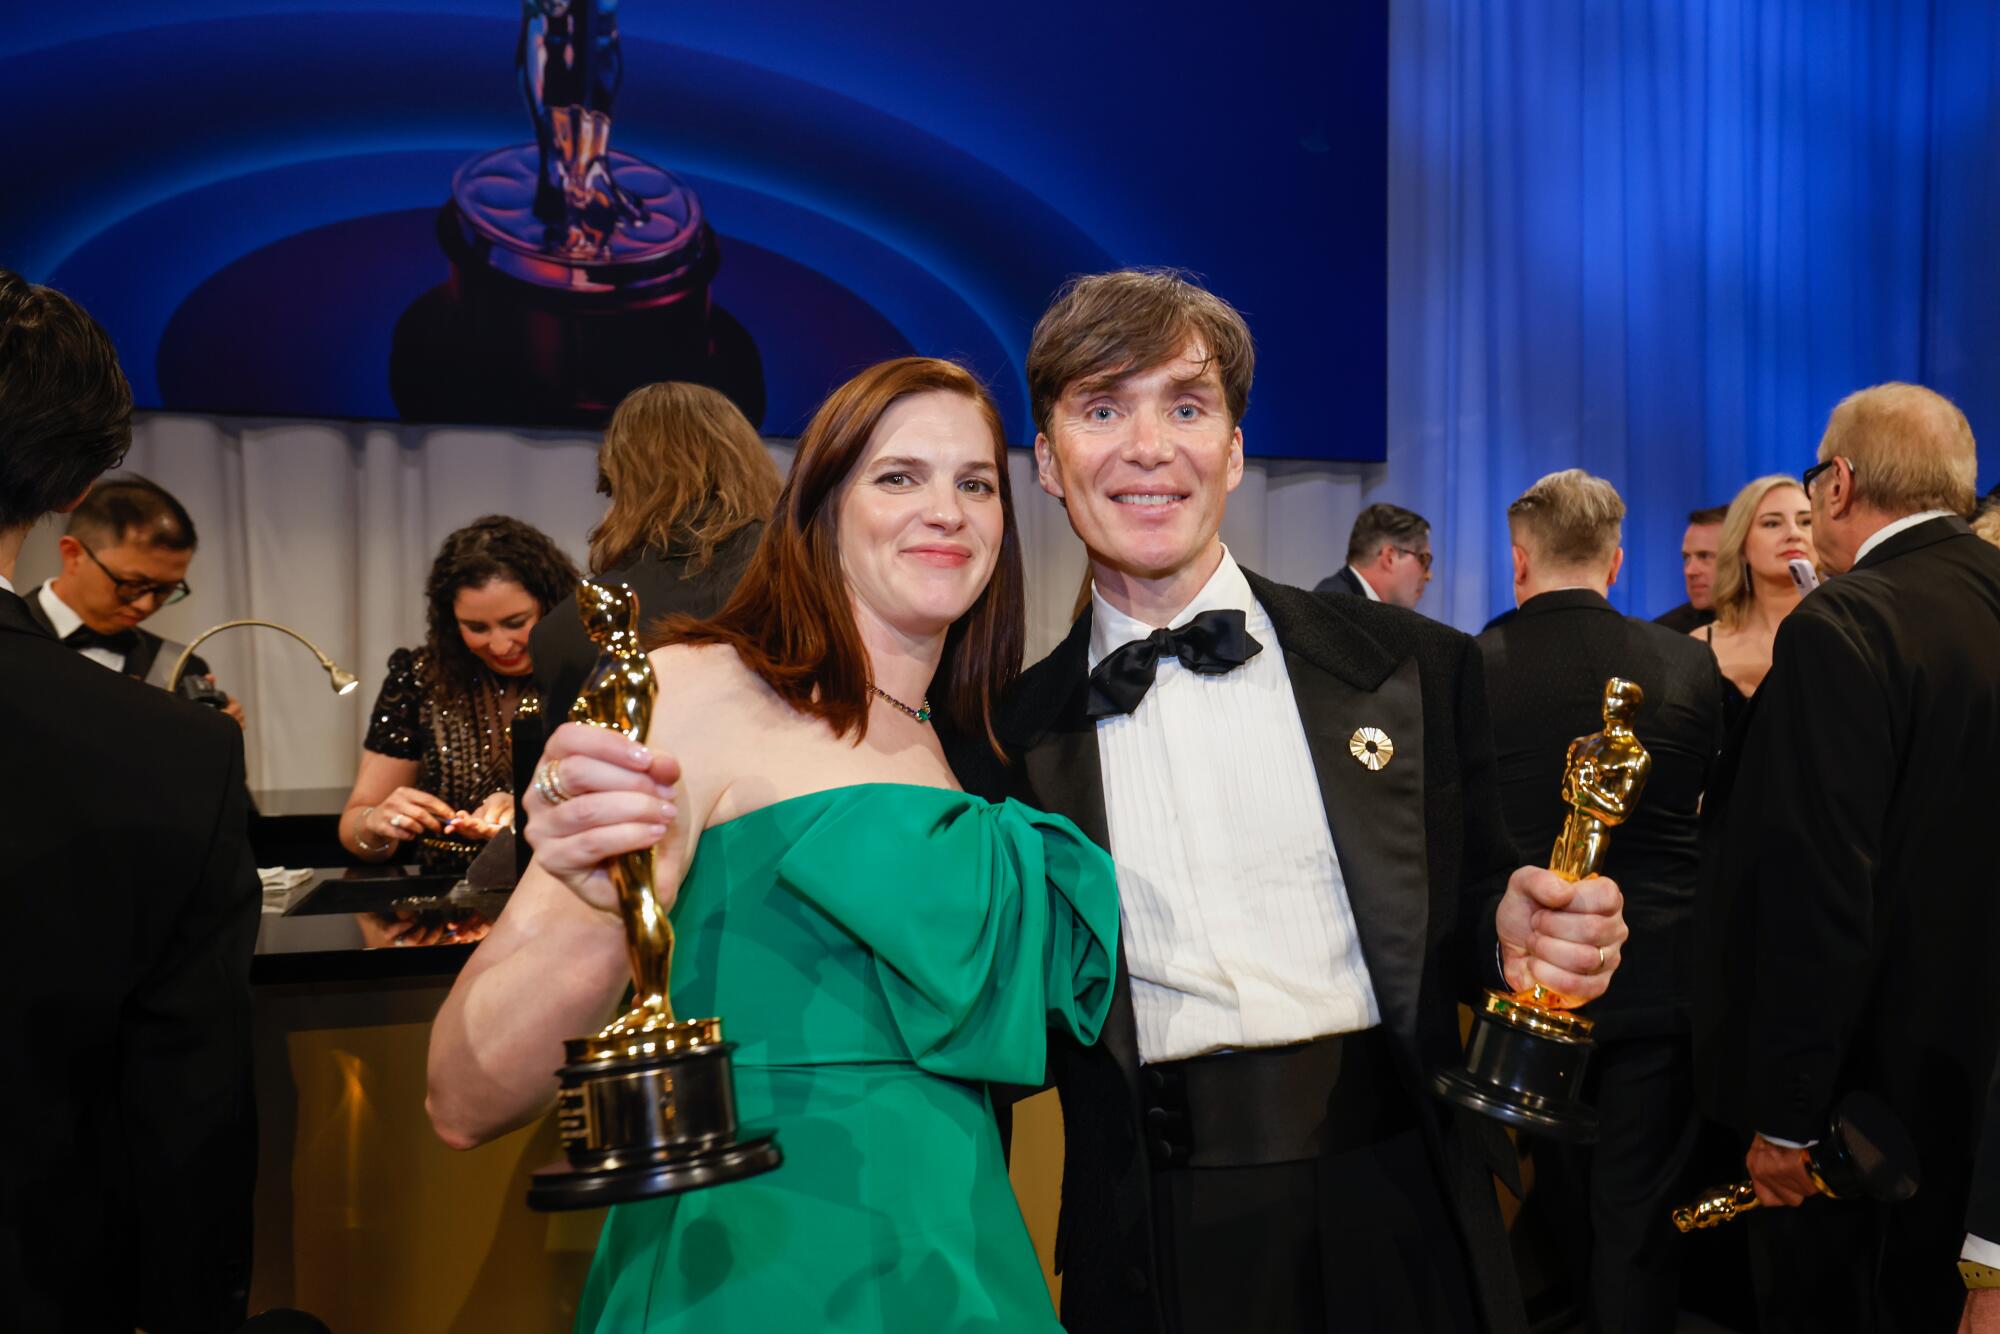 A woman and a man hold Oscar awards and smile at the camera.